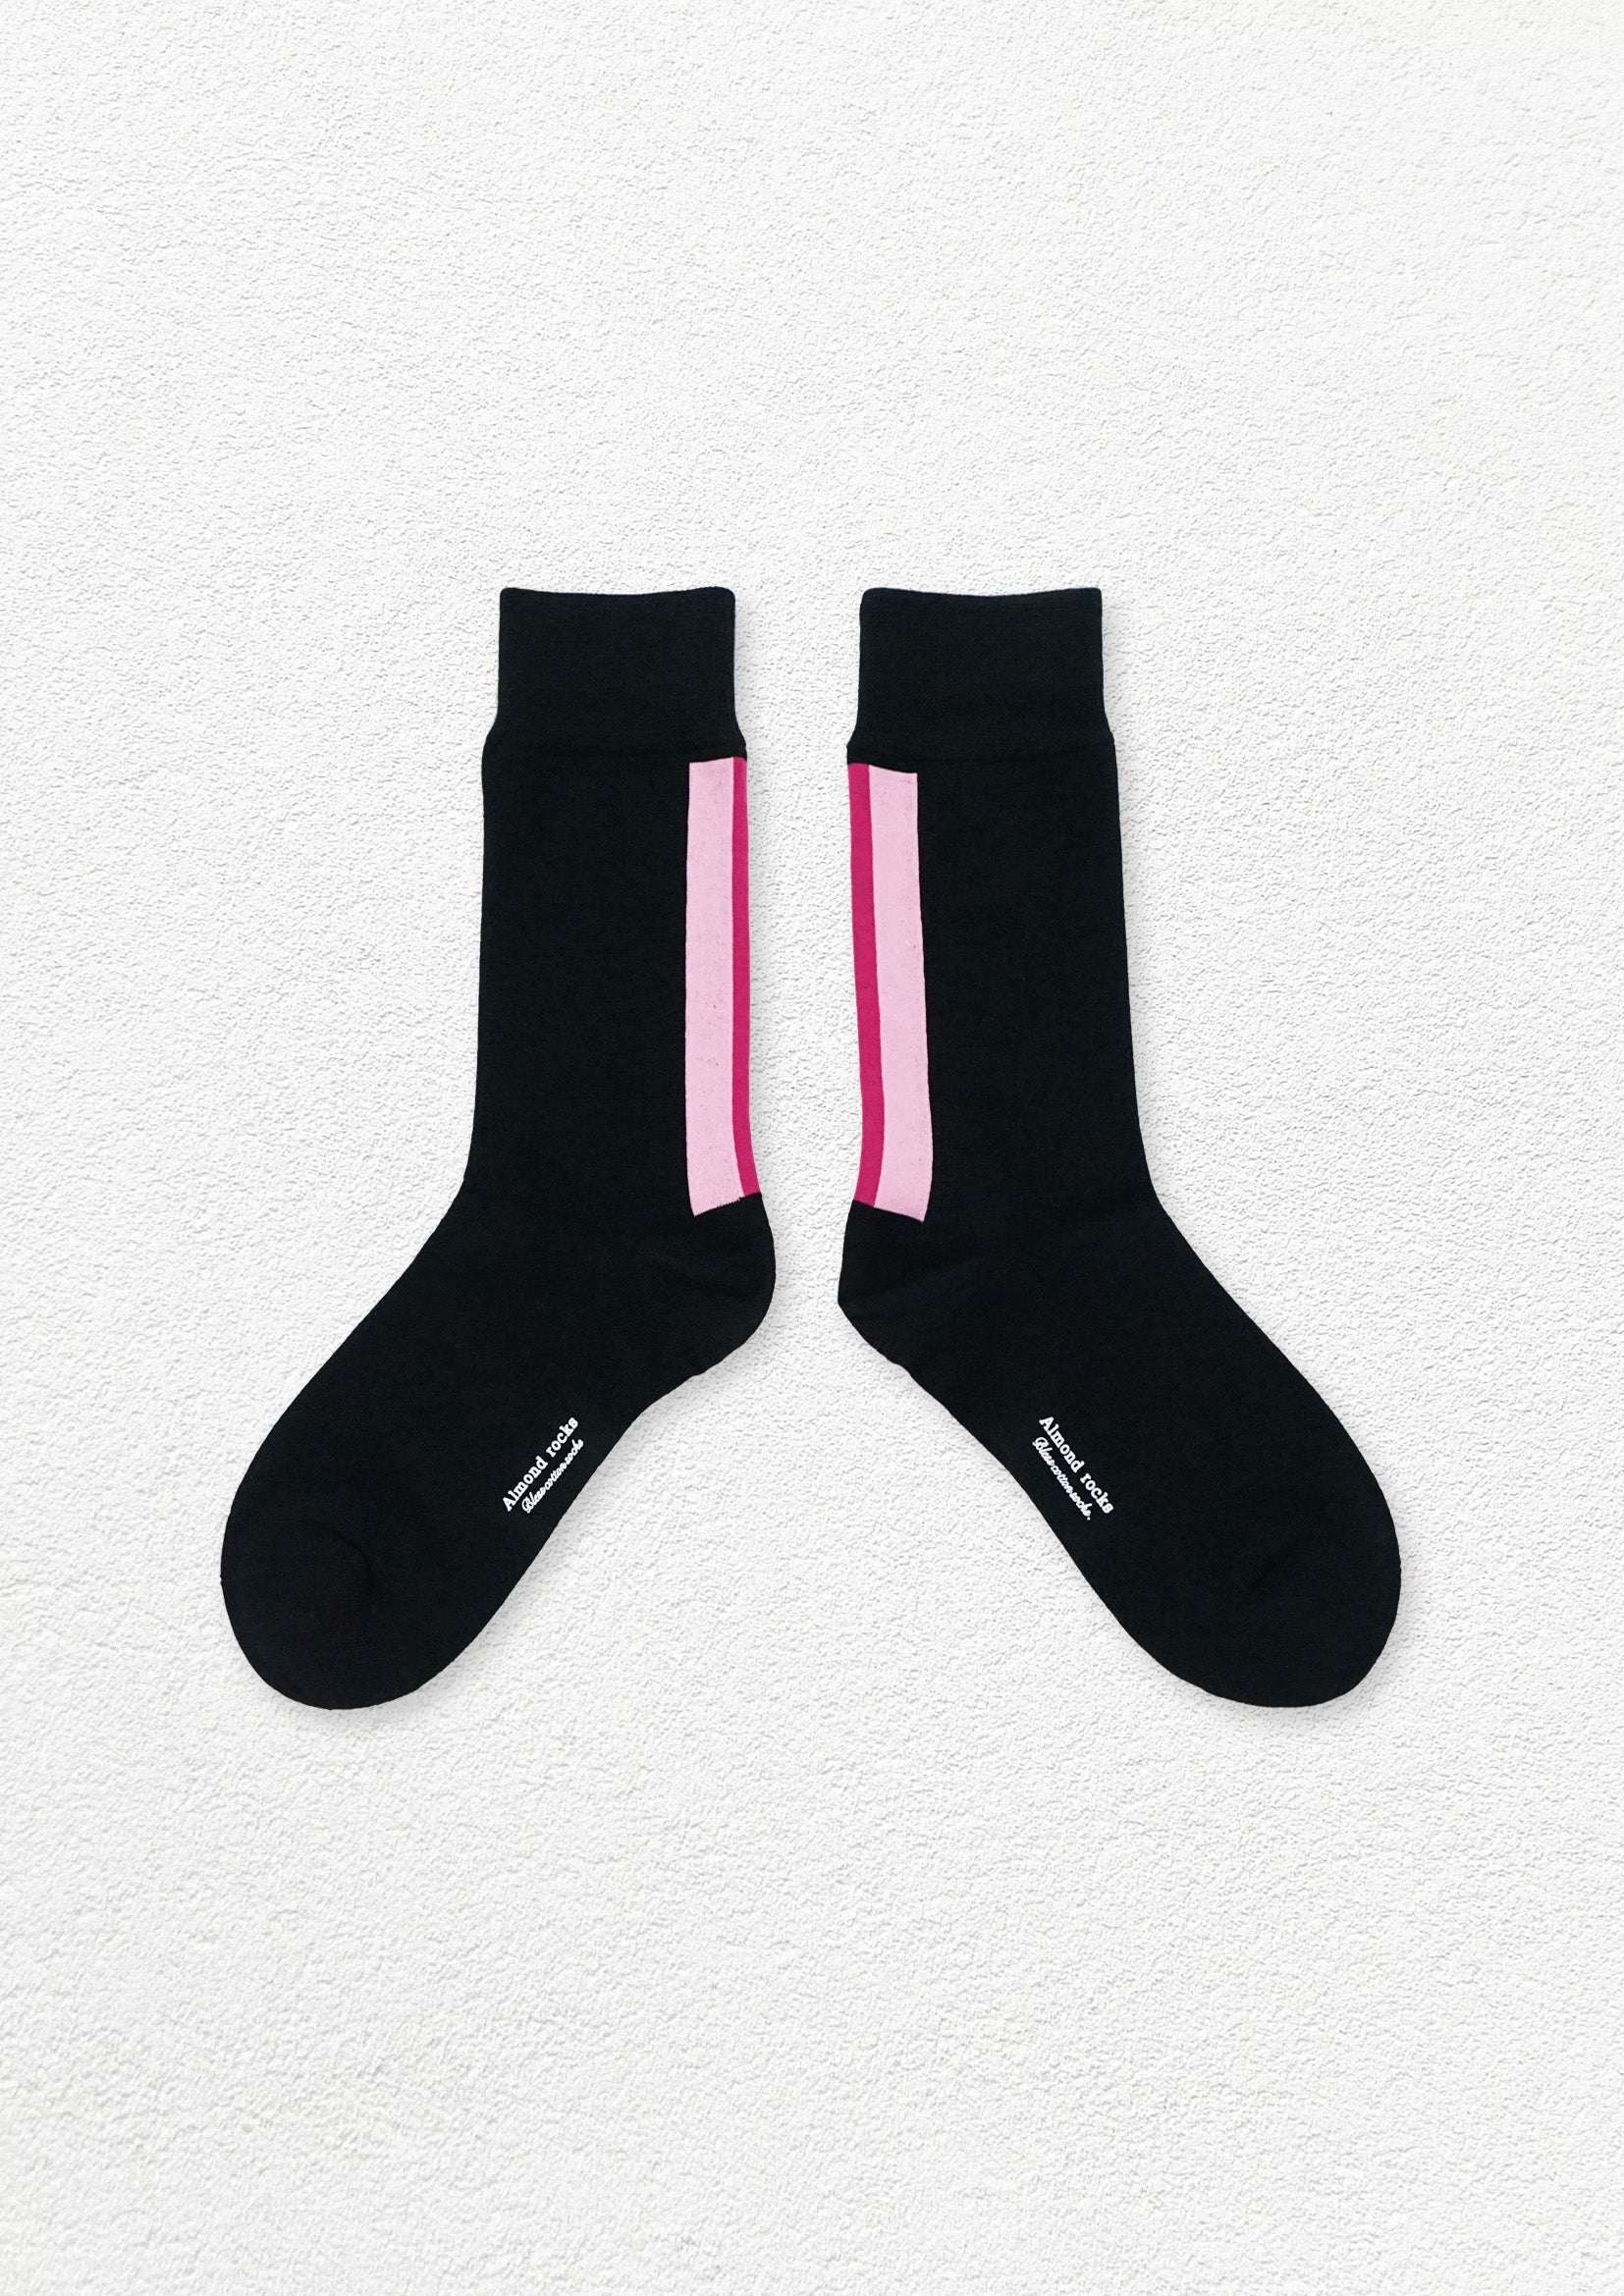 Colour collage mid-calf sock - pink